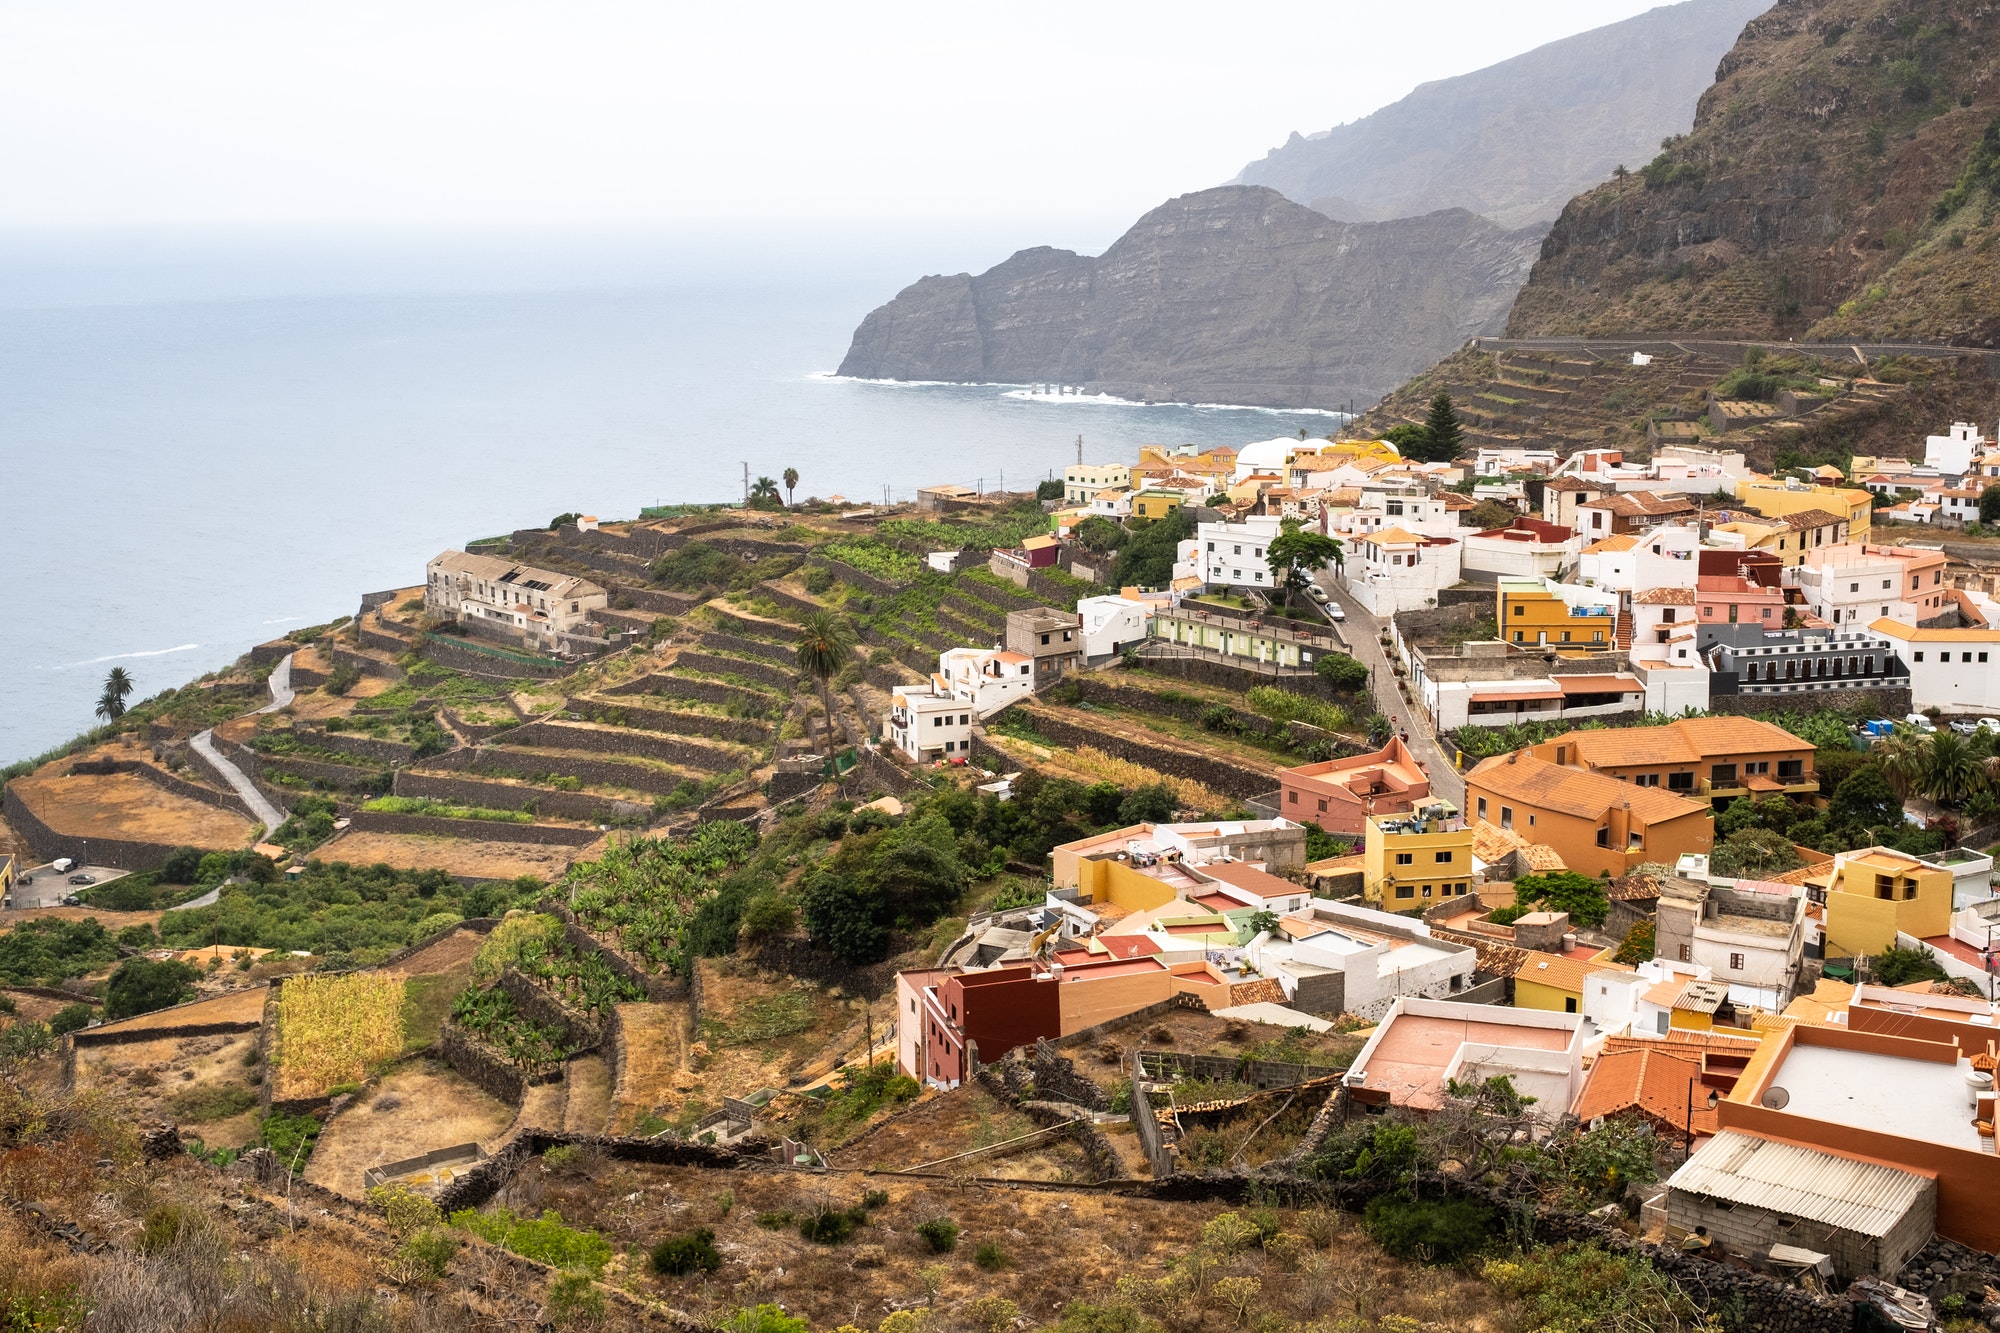 View of the old town on the rock of La Gomera island,Canary Islands, Spain